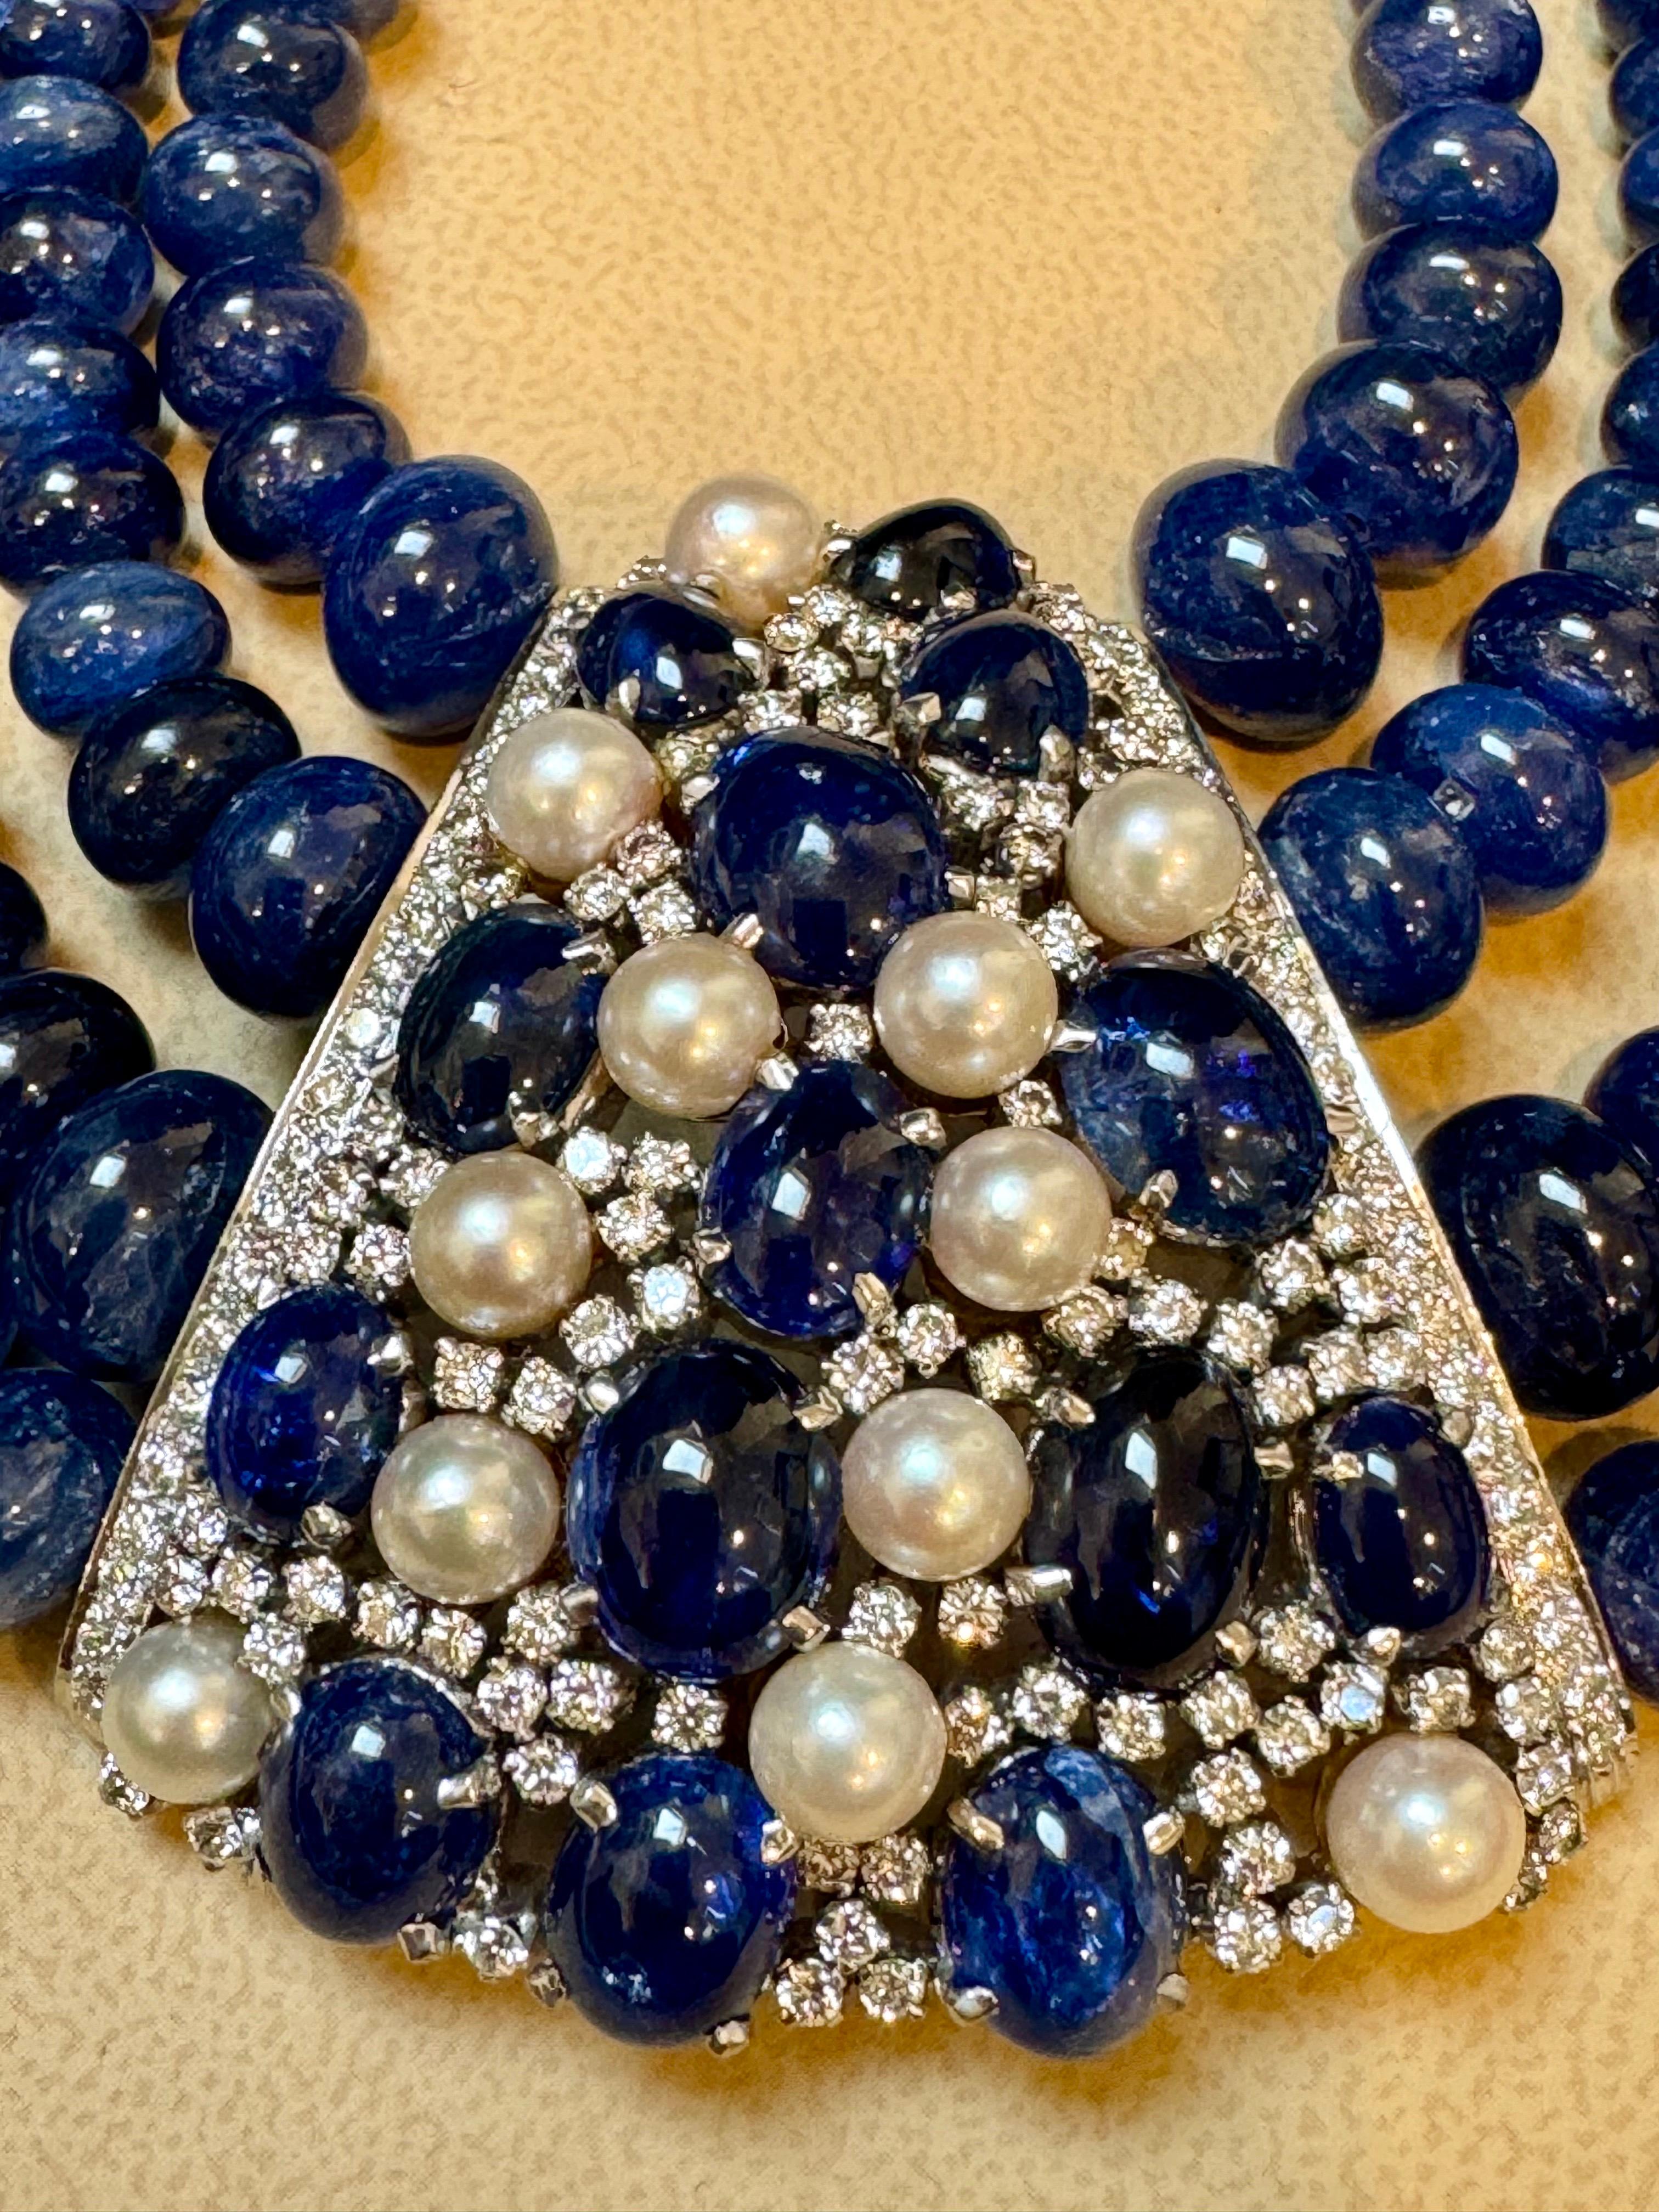 700Ct Sapphire Bead Necklace with cabochon & Diamond Center & Diamond Spacer 18K For Sale 5